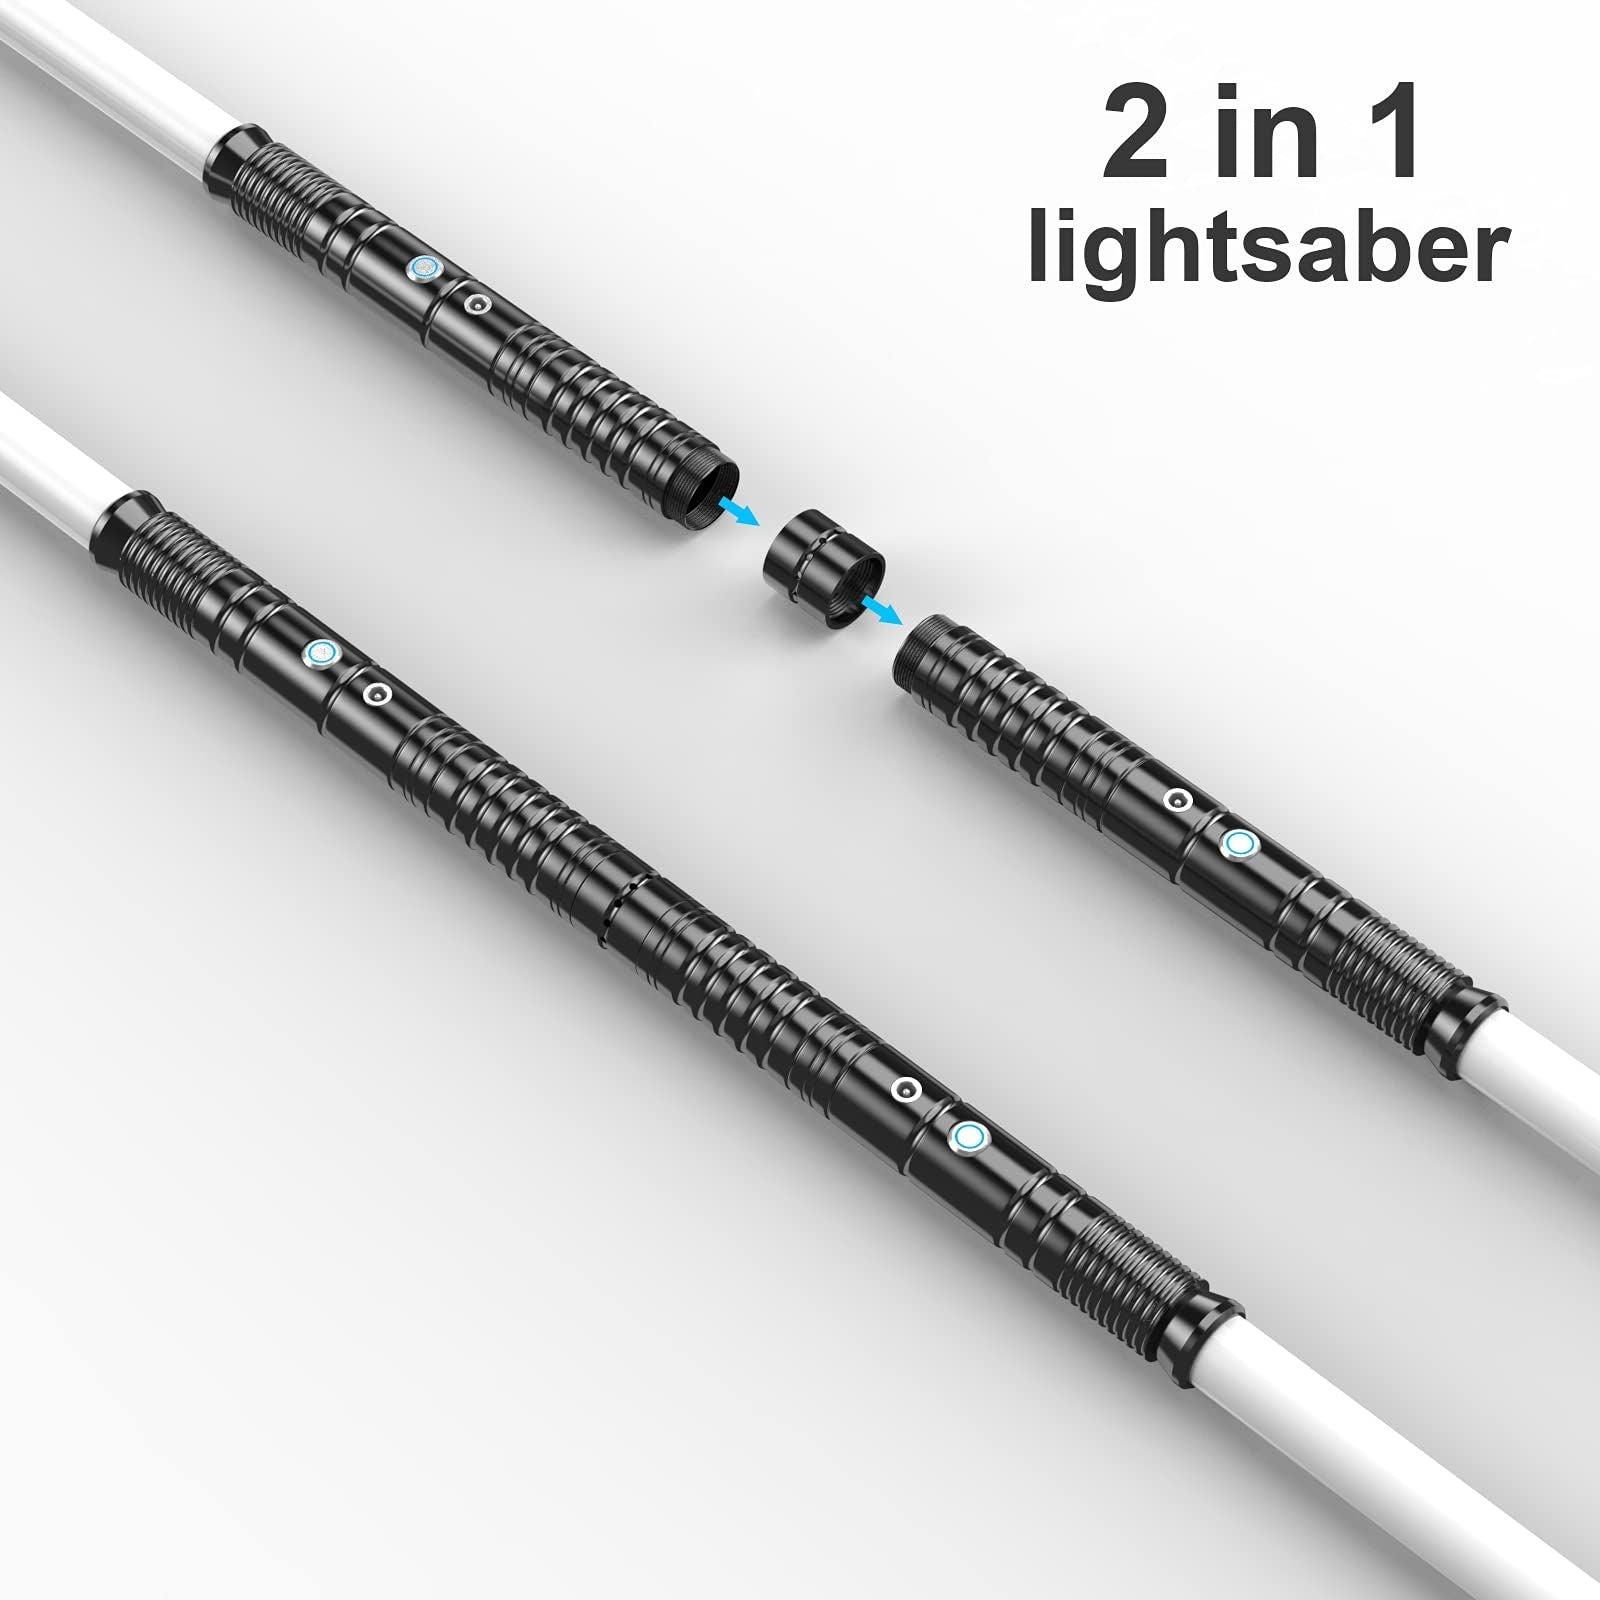 Lorsaberus Lightsaber, 2-in-1 RGB FX Dueling Light saber for Kids, Premium Aluminium Alloy Hilt Dual Light sabers with 7 Colors Changeable, Halloween Cosplay, 2 Pack 4